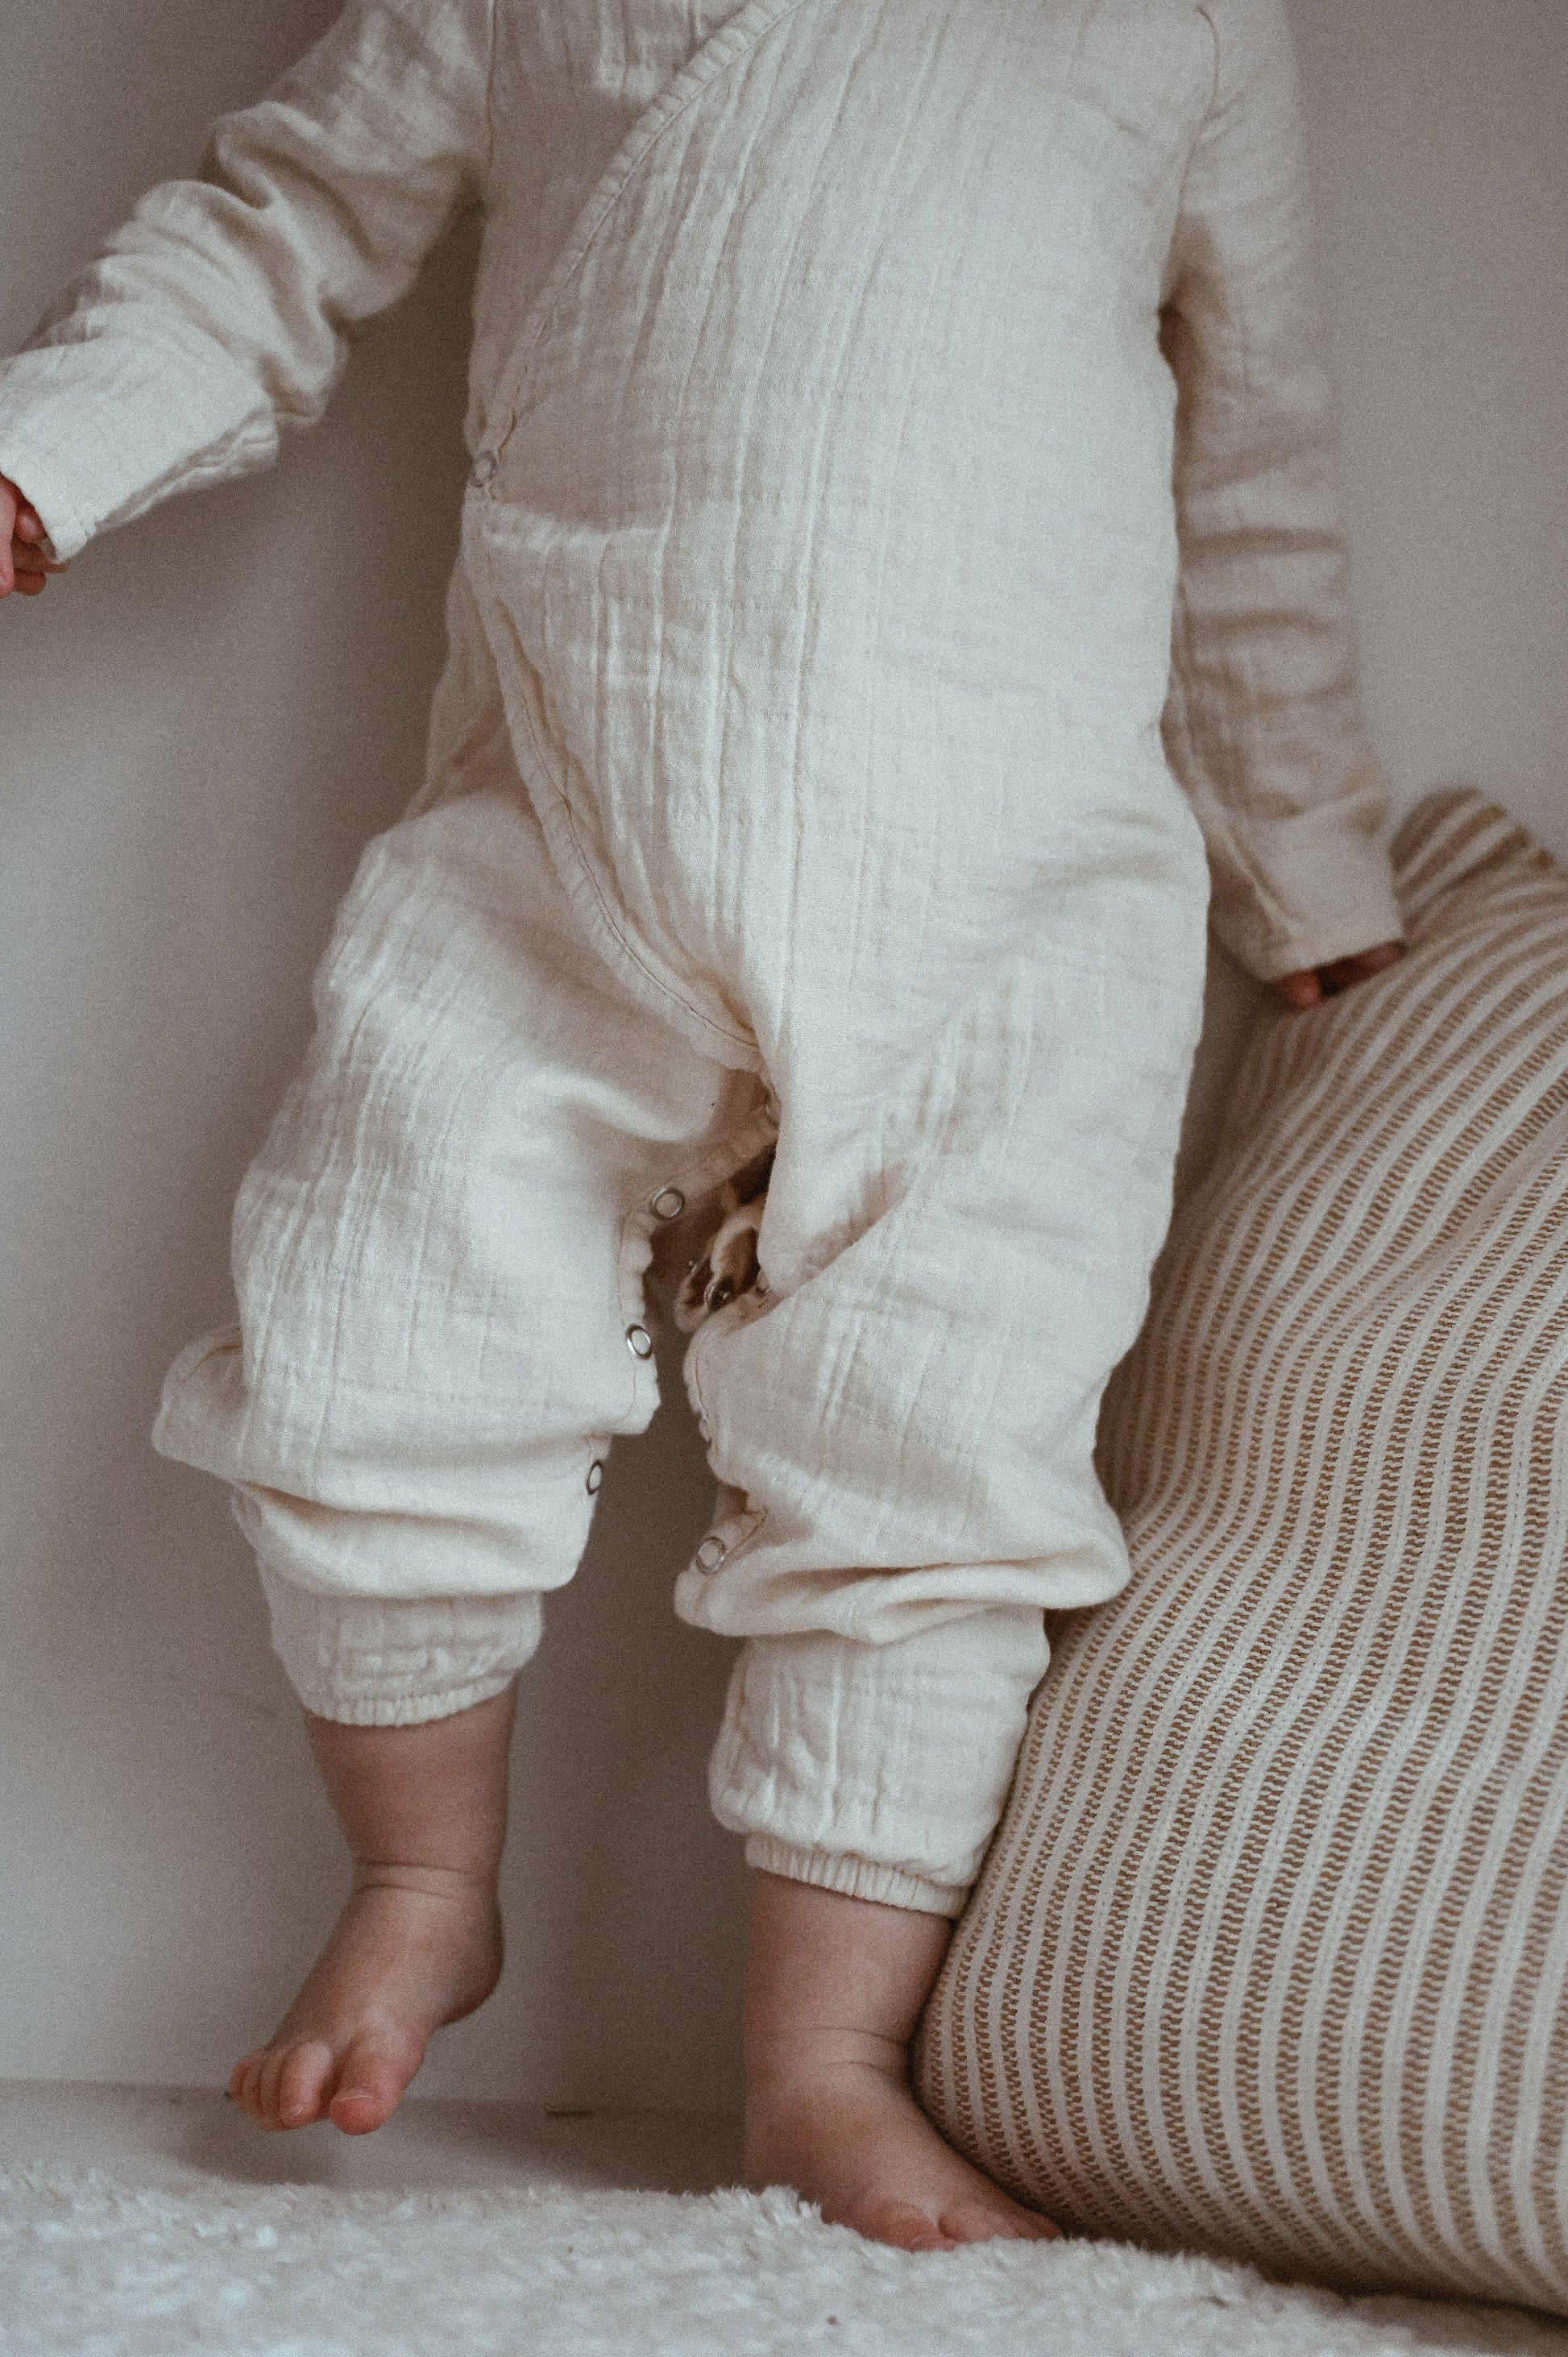 an essential part of a babies layette, this is a perfect outfit for newborns. ethically made in canada. 100% organic cotton double gauze check. from calgary children's baby clothing company cabane childrenswear.